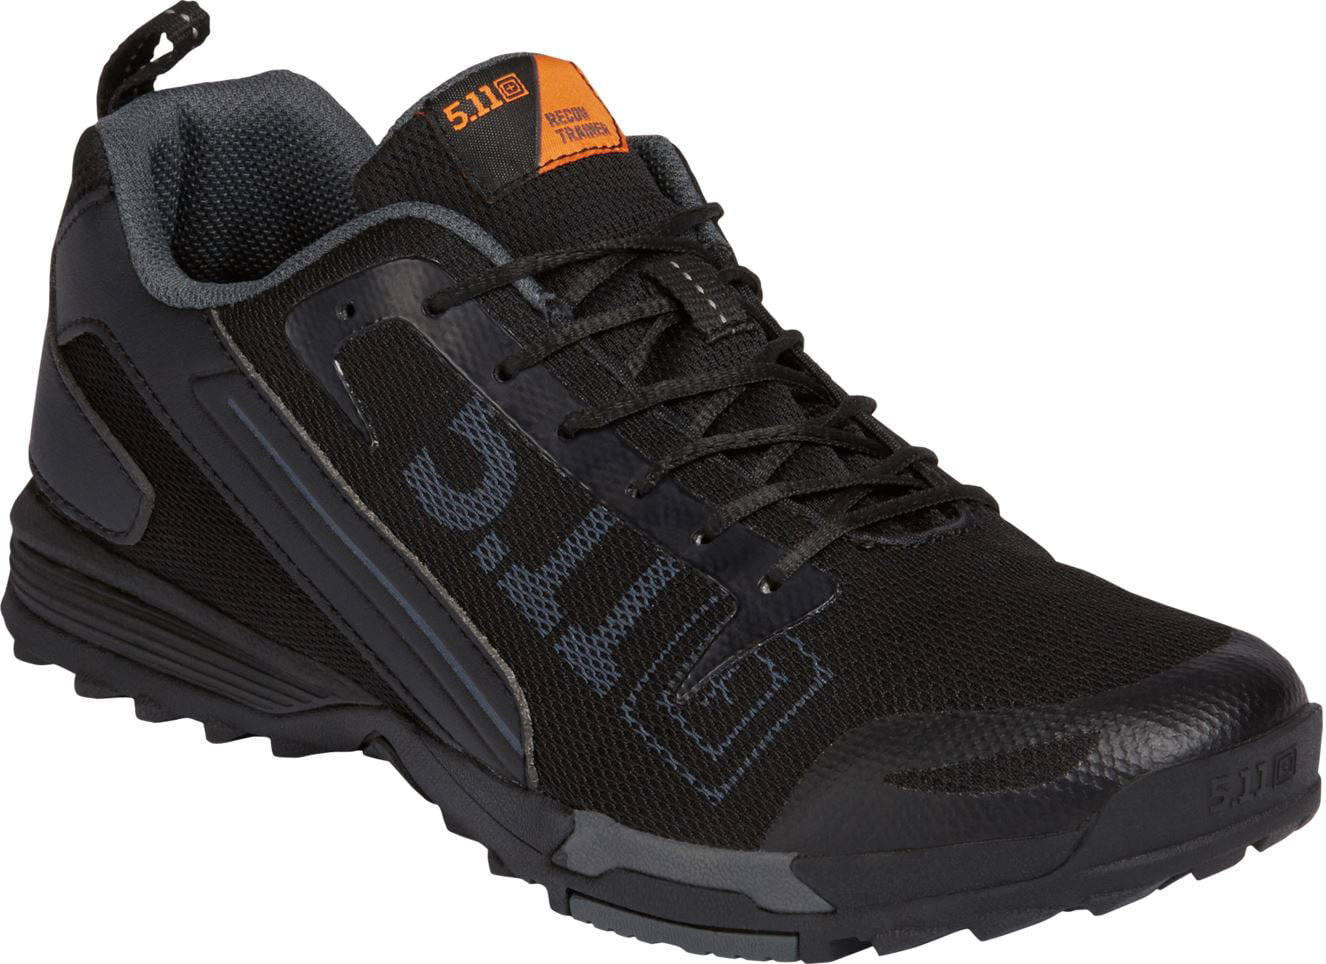 5.11 Recon Trainer Lightweight Athletic 